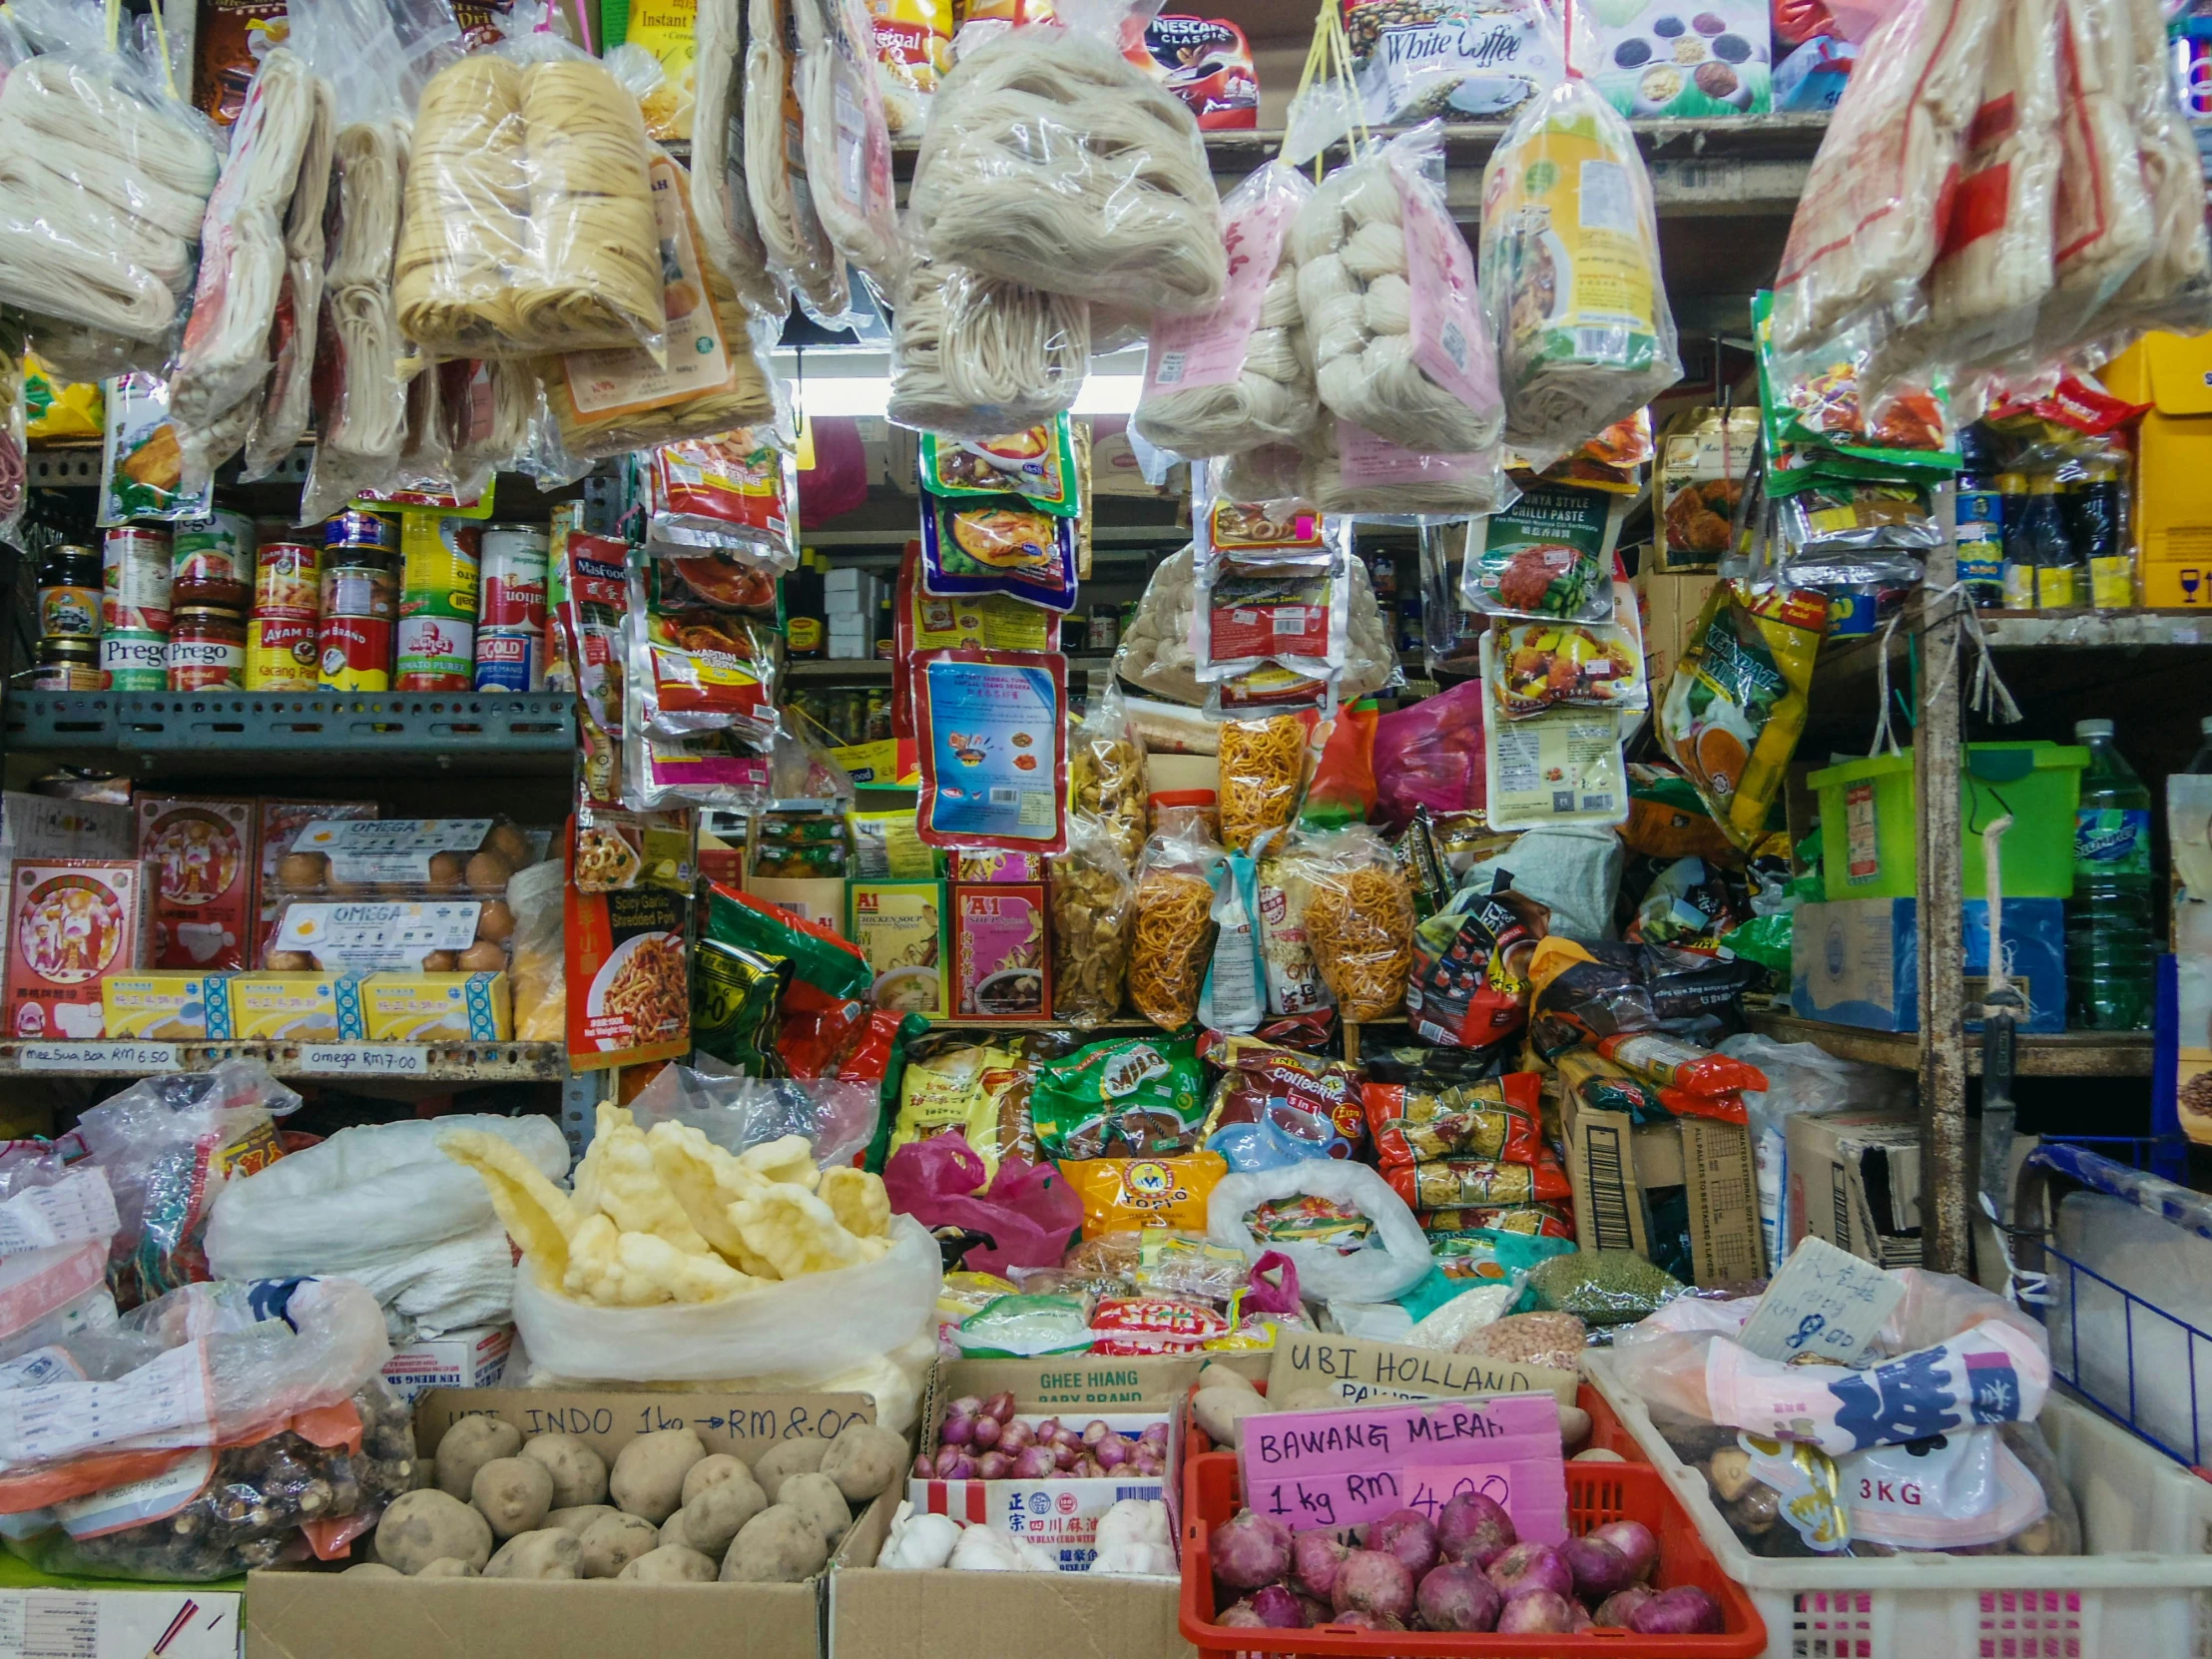 assortment of bags and food items in shop with display